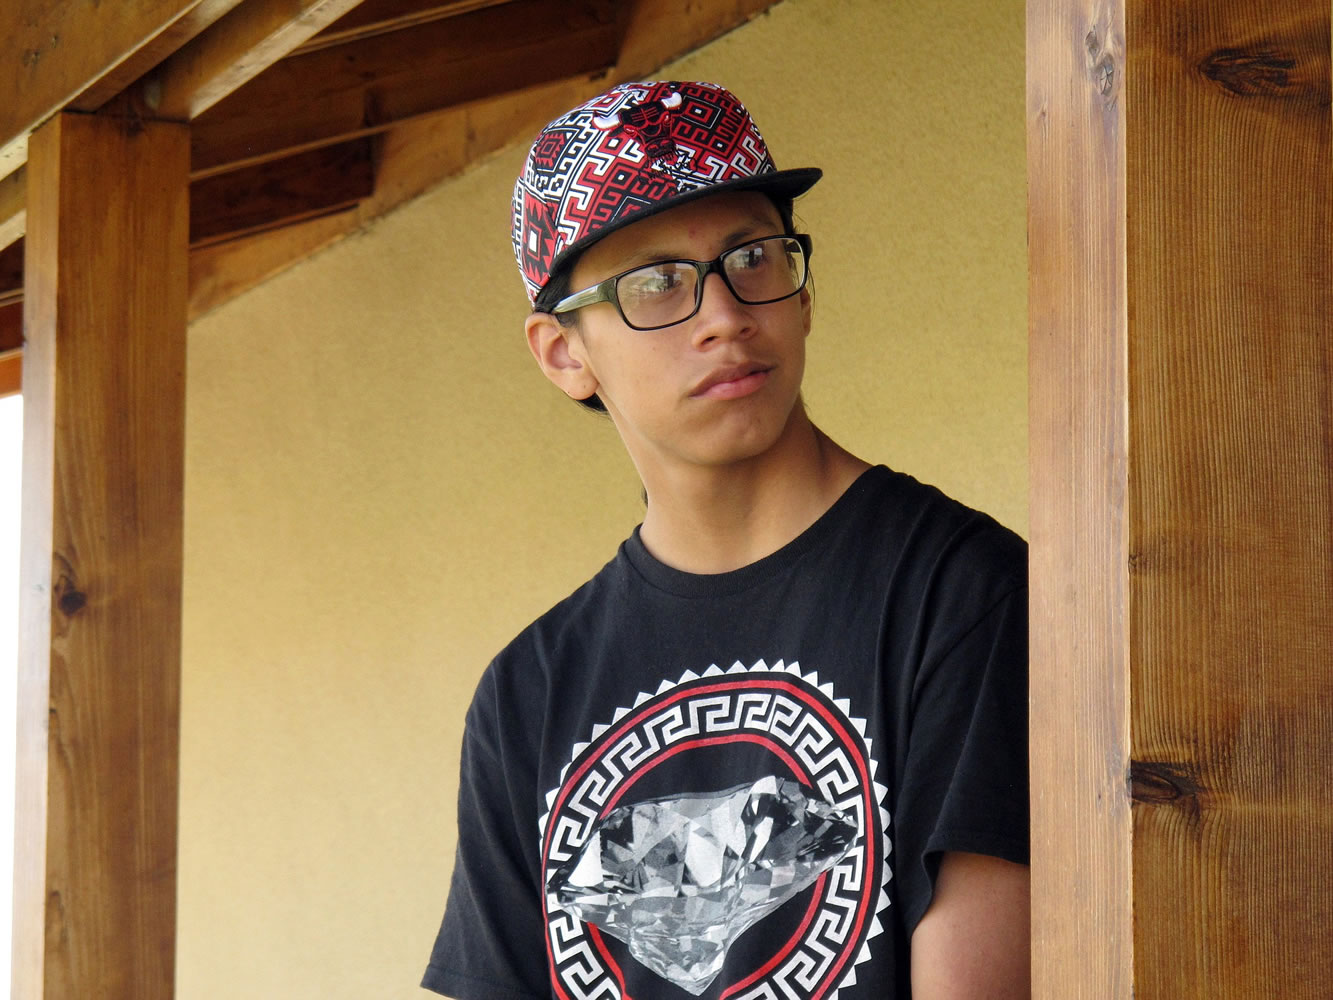 16-year-old Miguel Wambli stands at the Pine Ridge Indian Reservation in Porcupine, S.D.